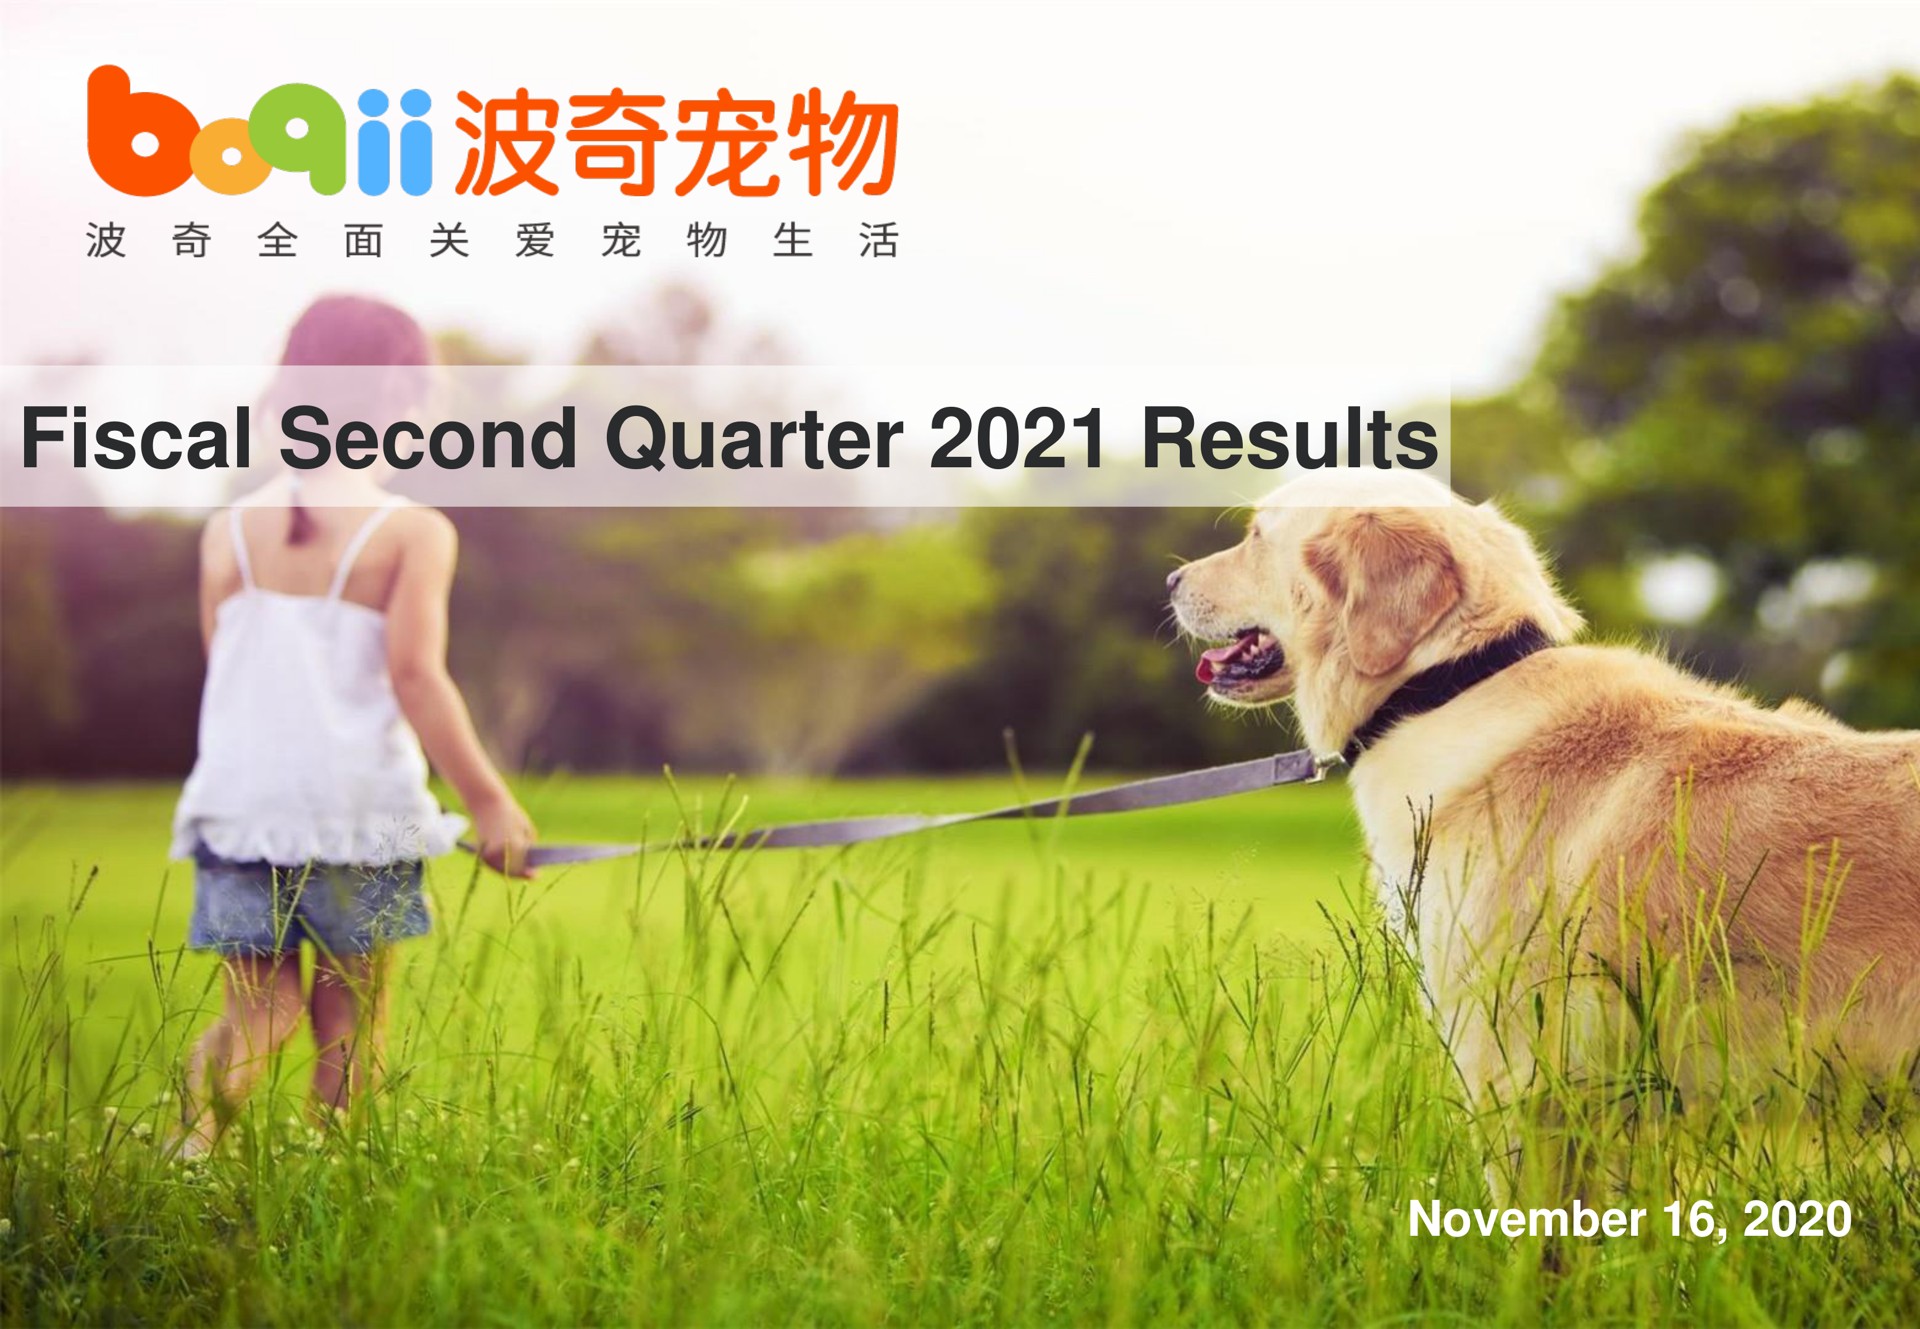 fiscal second quarter results be ply | Boqii Holding